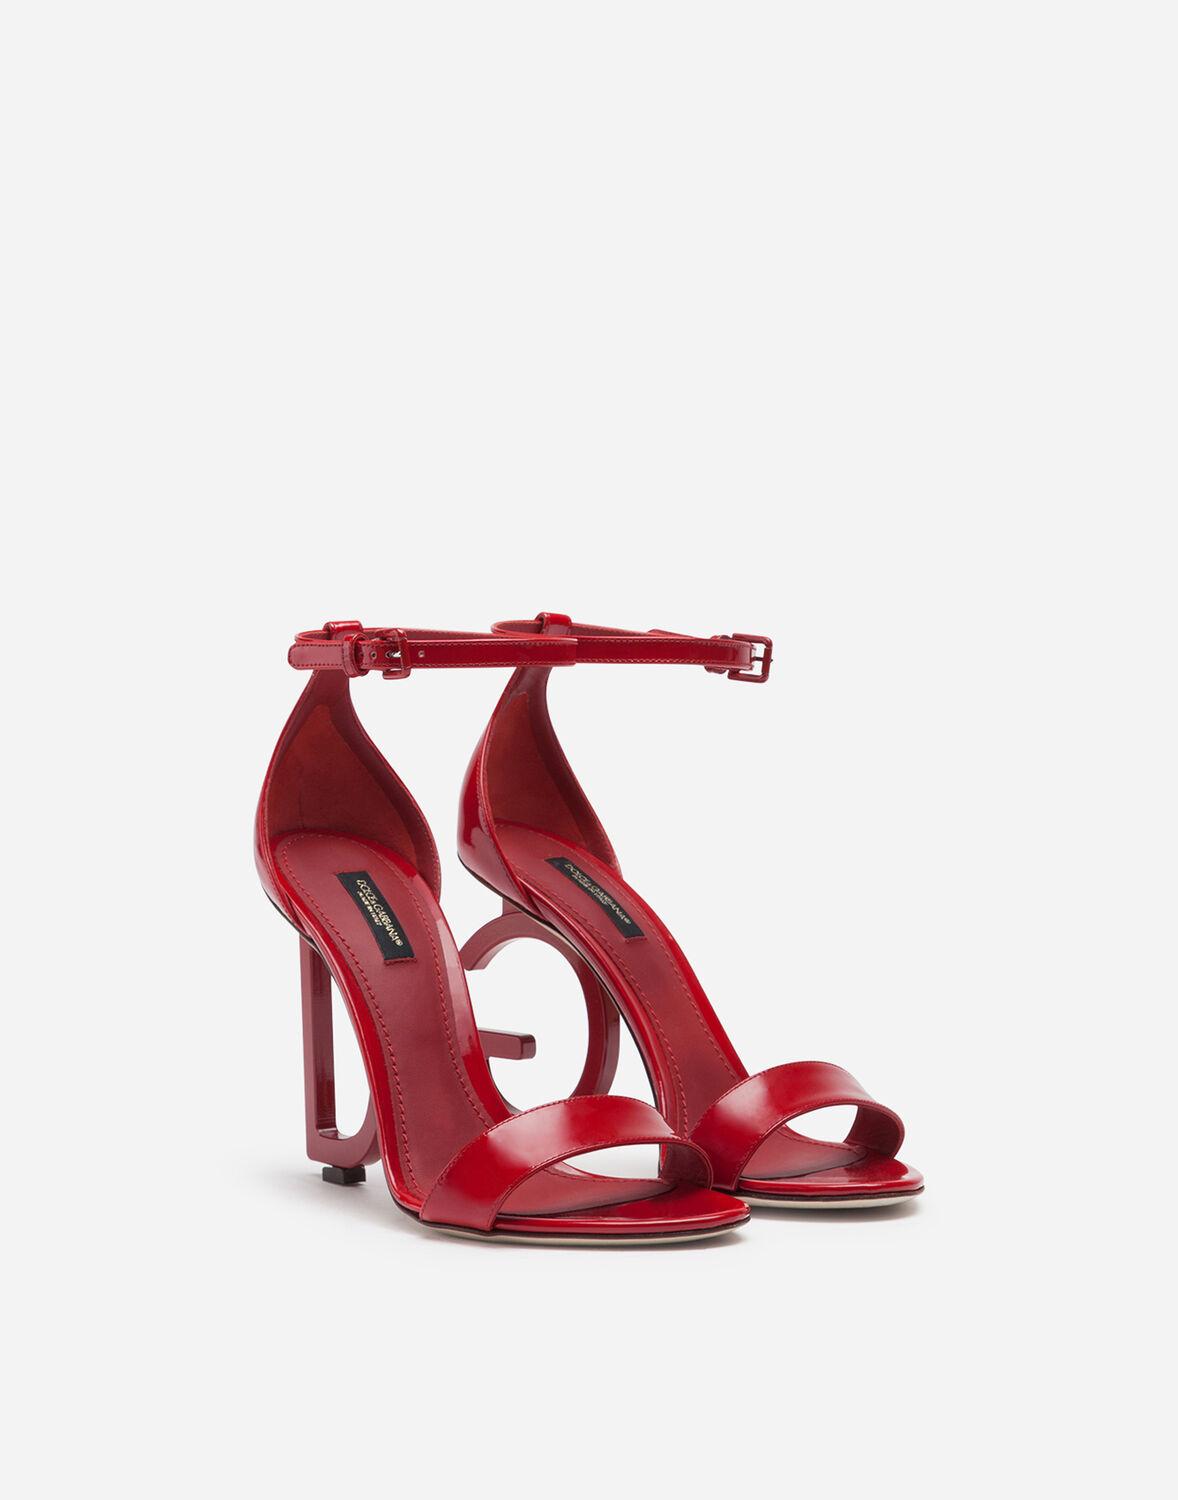 Dolce & Gabbana Patent Leather Sandals With Dg Heel in Red | Lyst